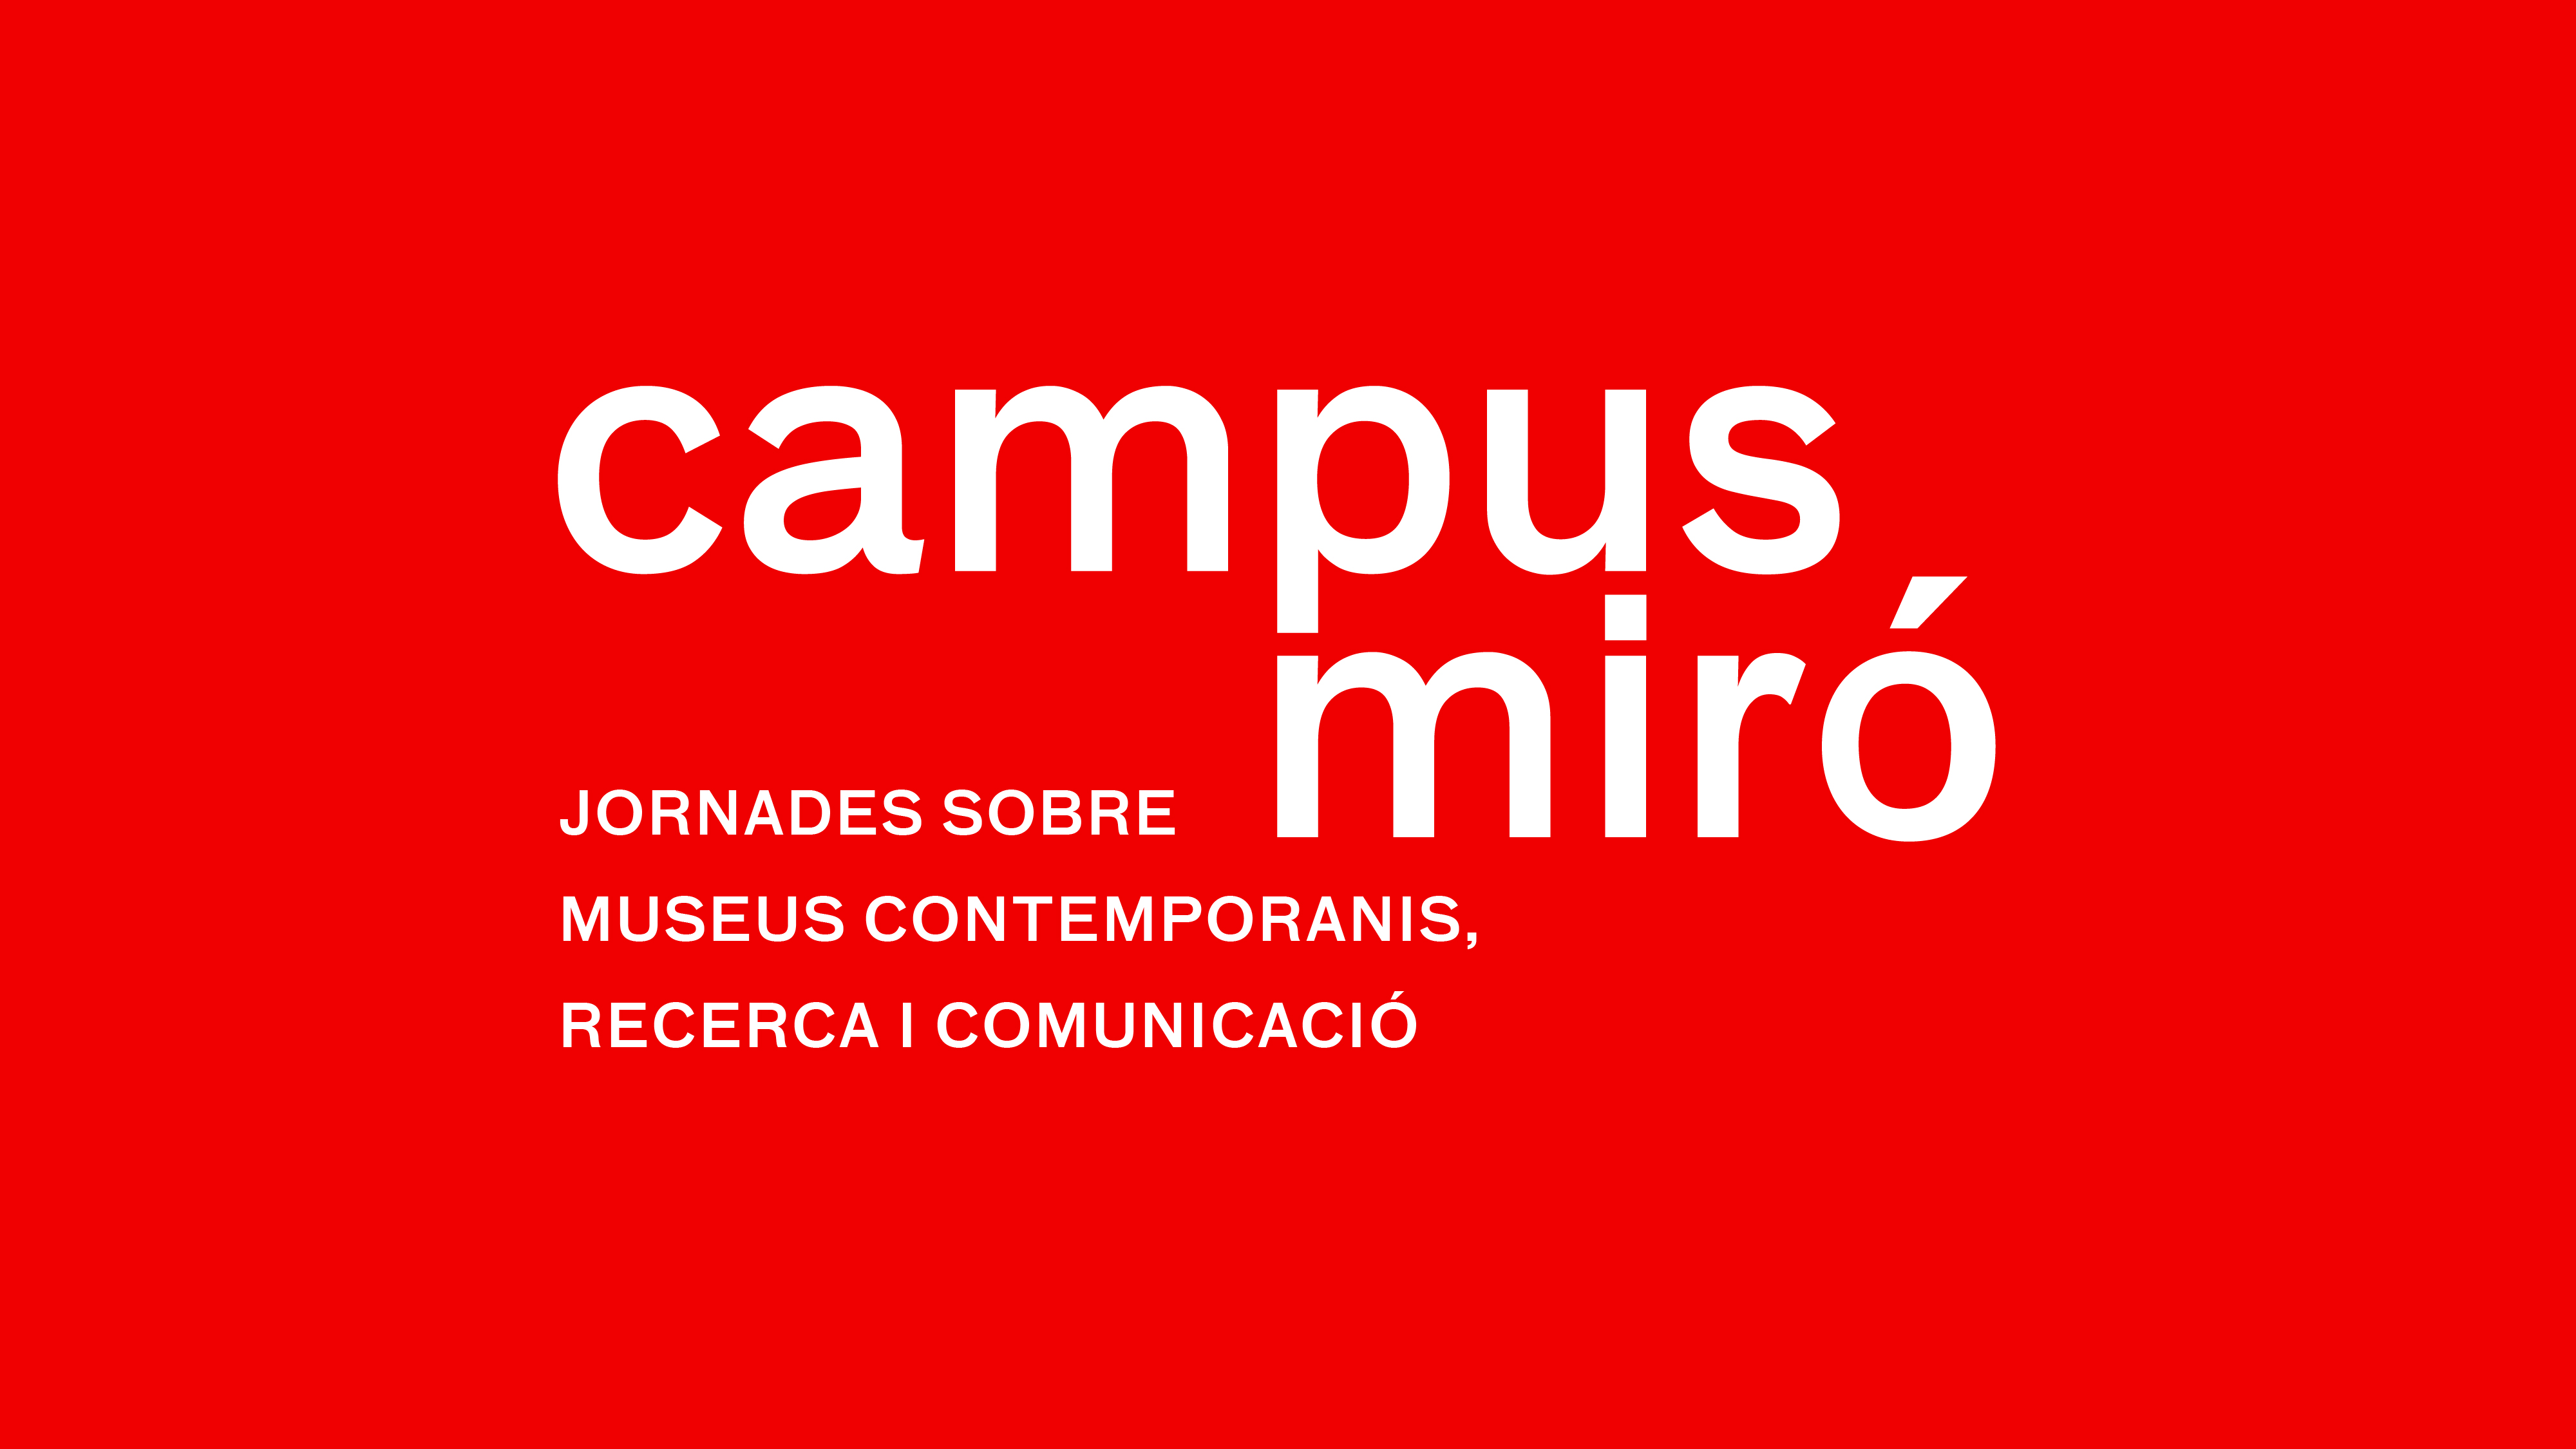 First edition of the Miró Campus: conferences on contemporary museums, research and communication